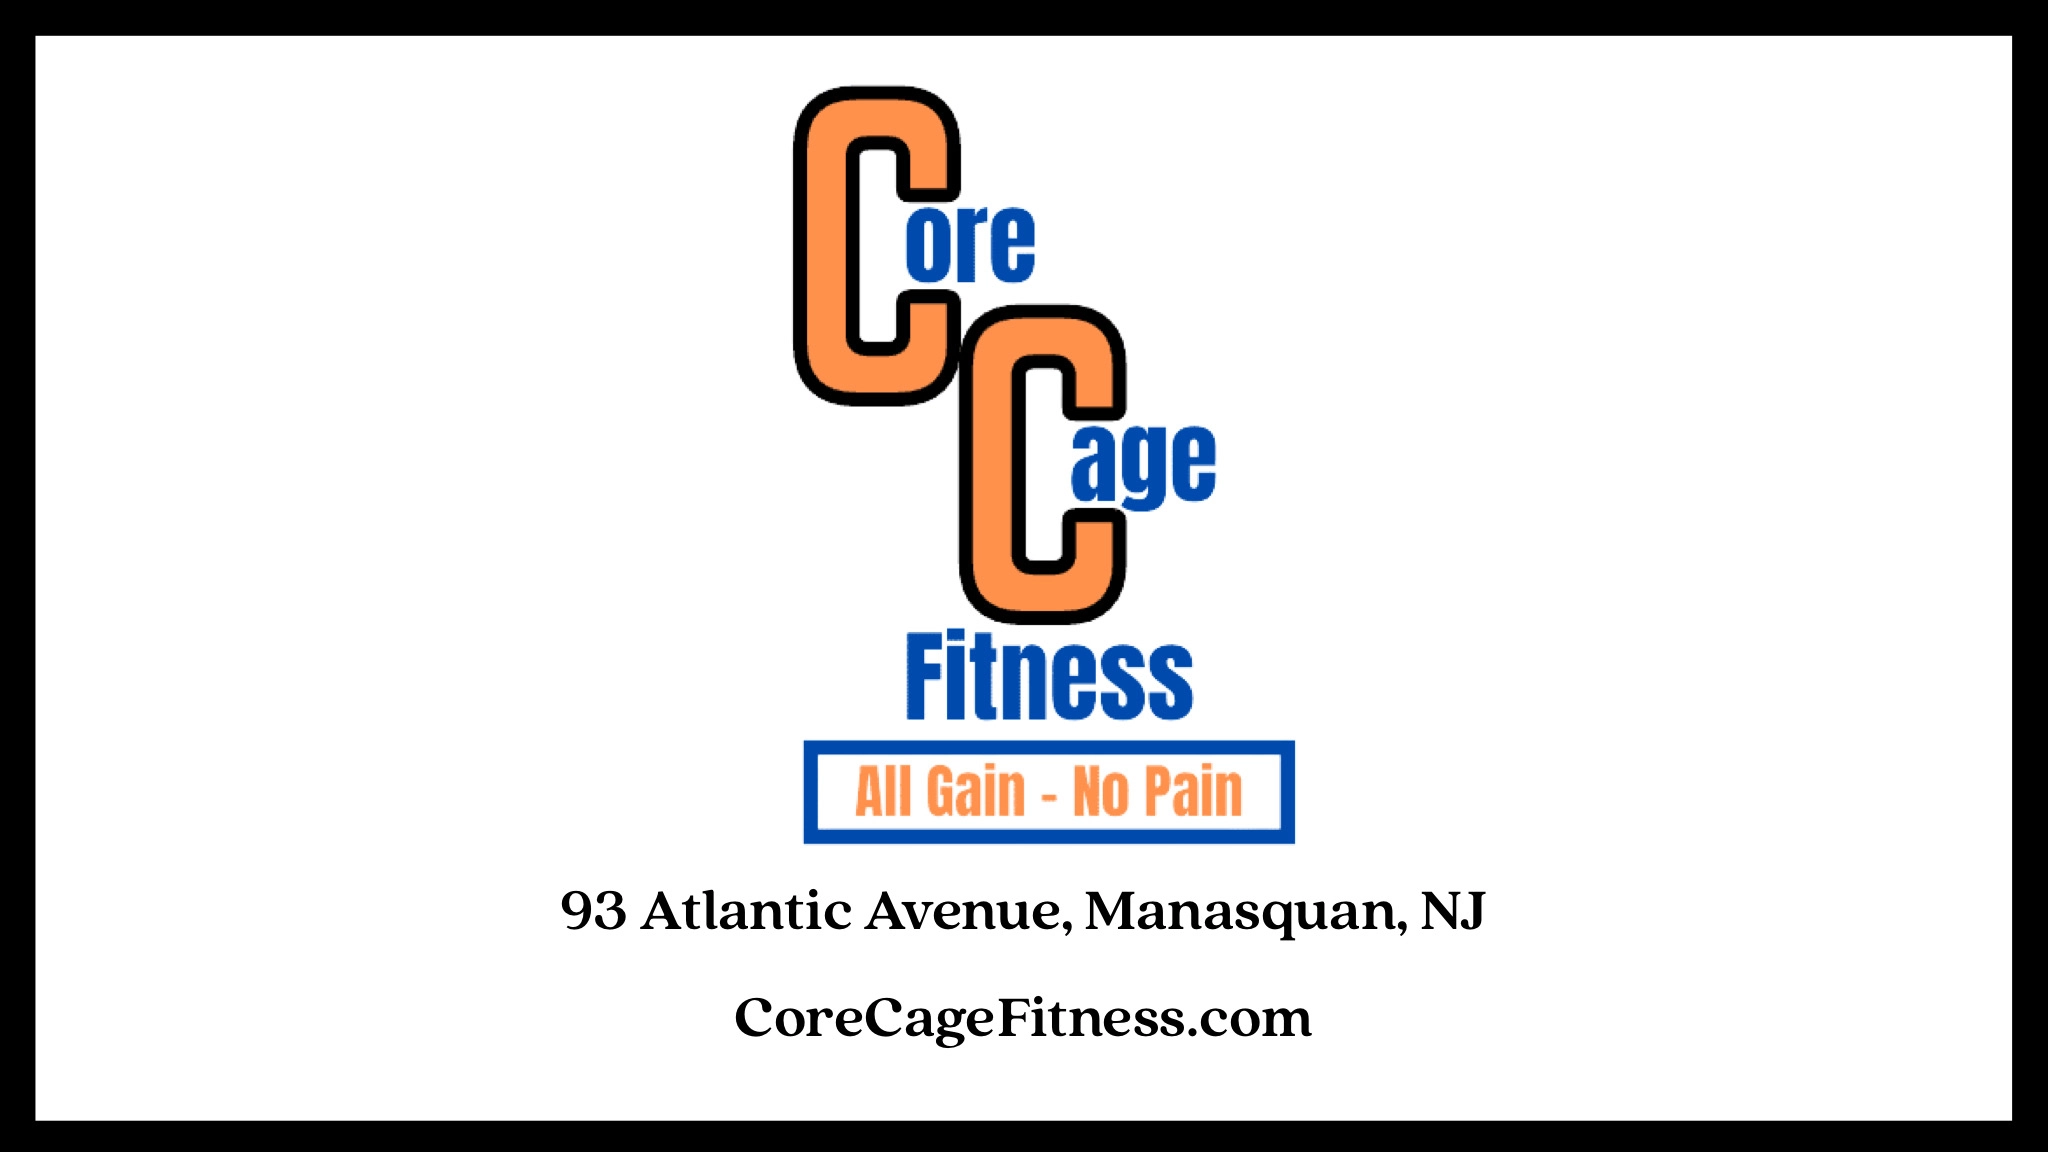 Core Cage Fitness Graphic